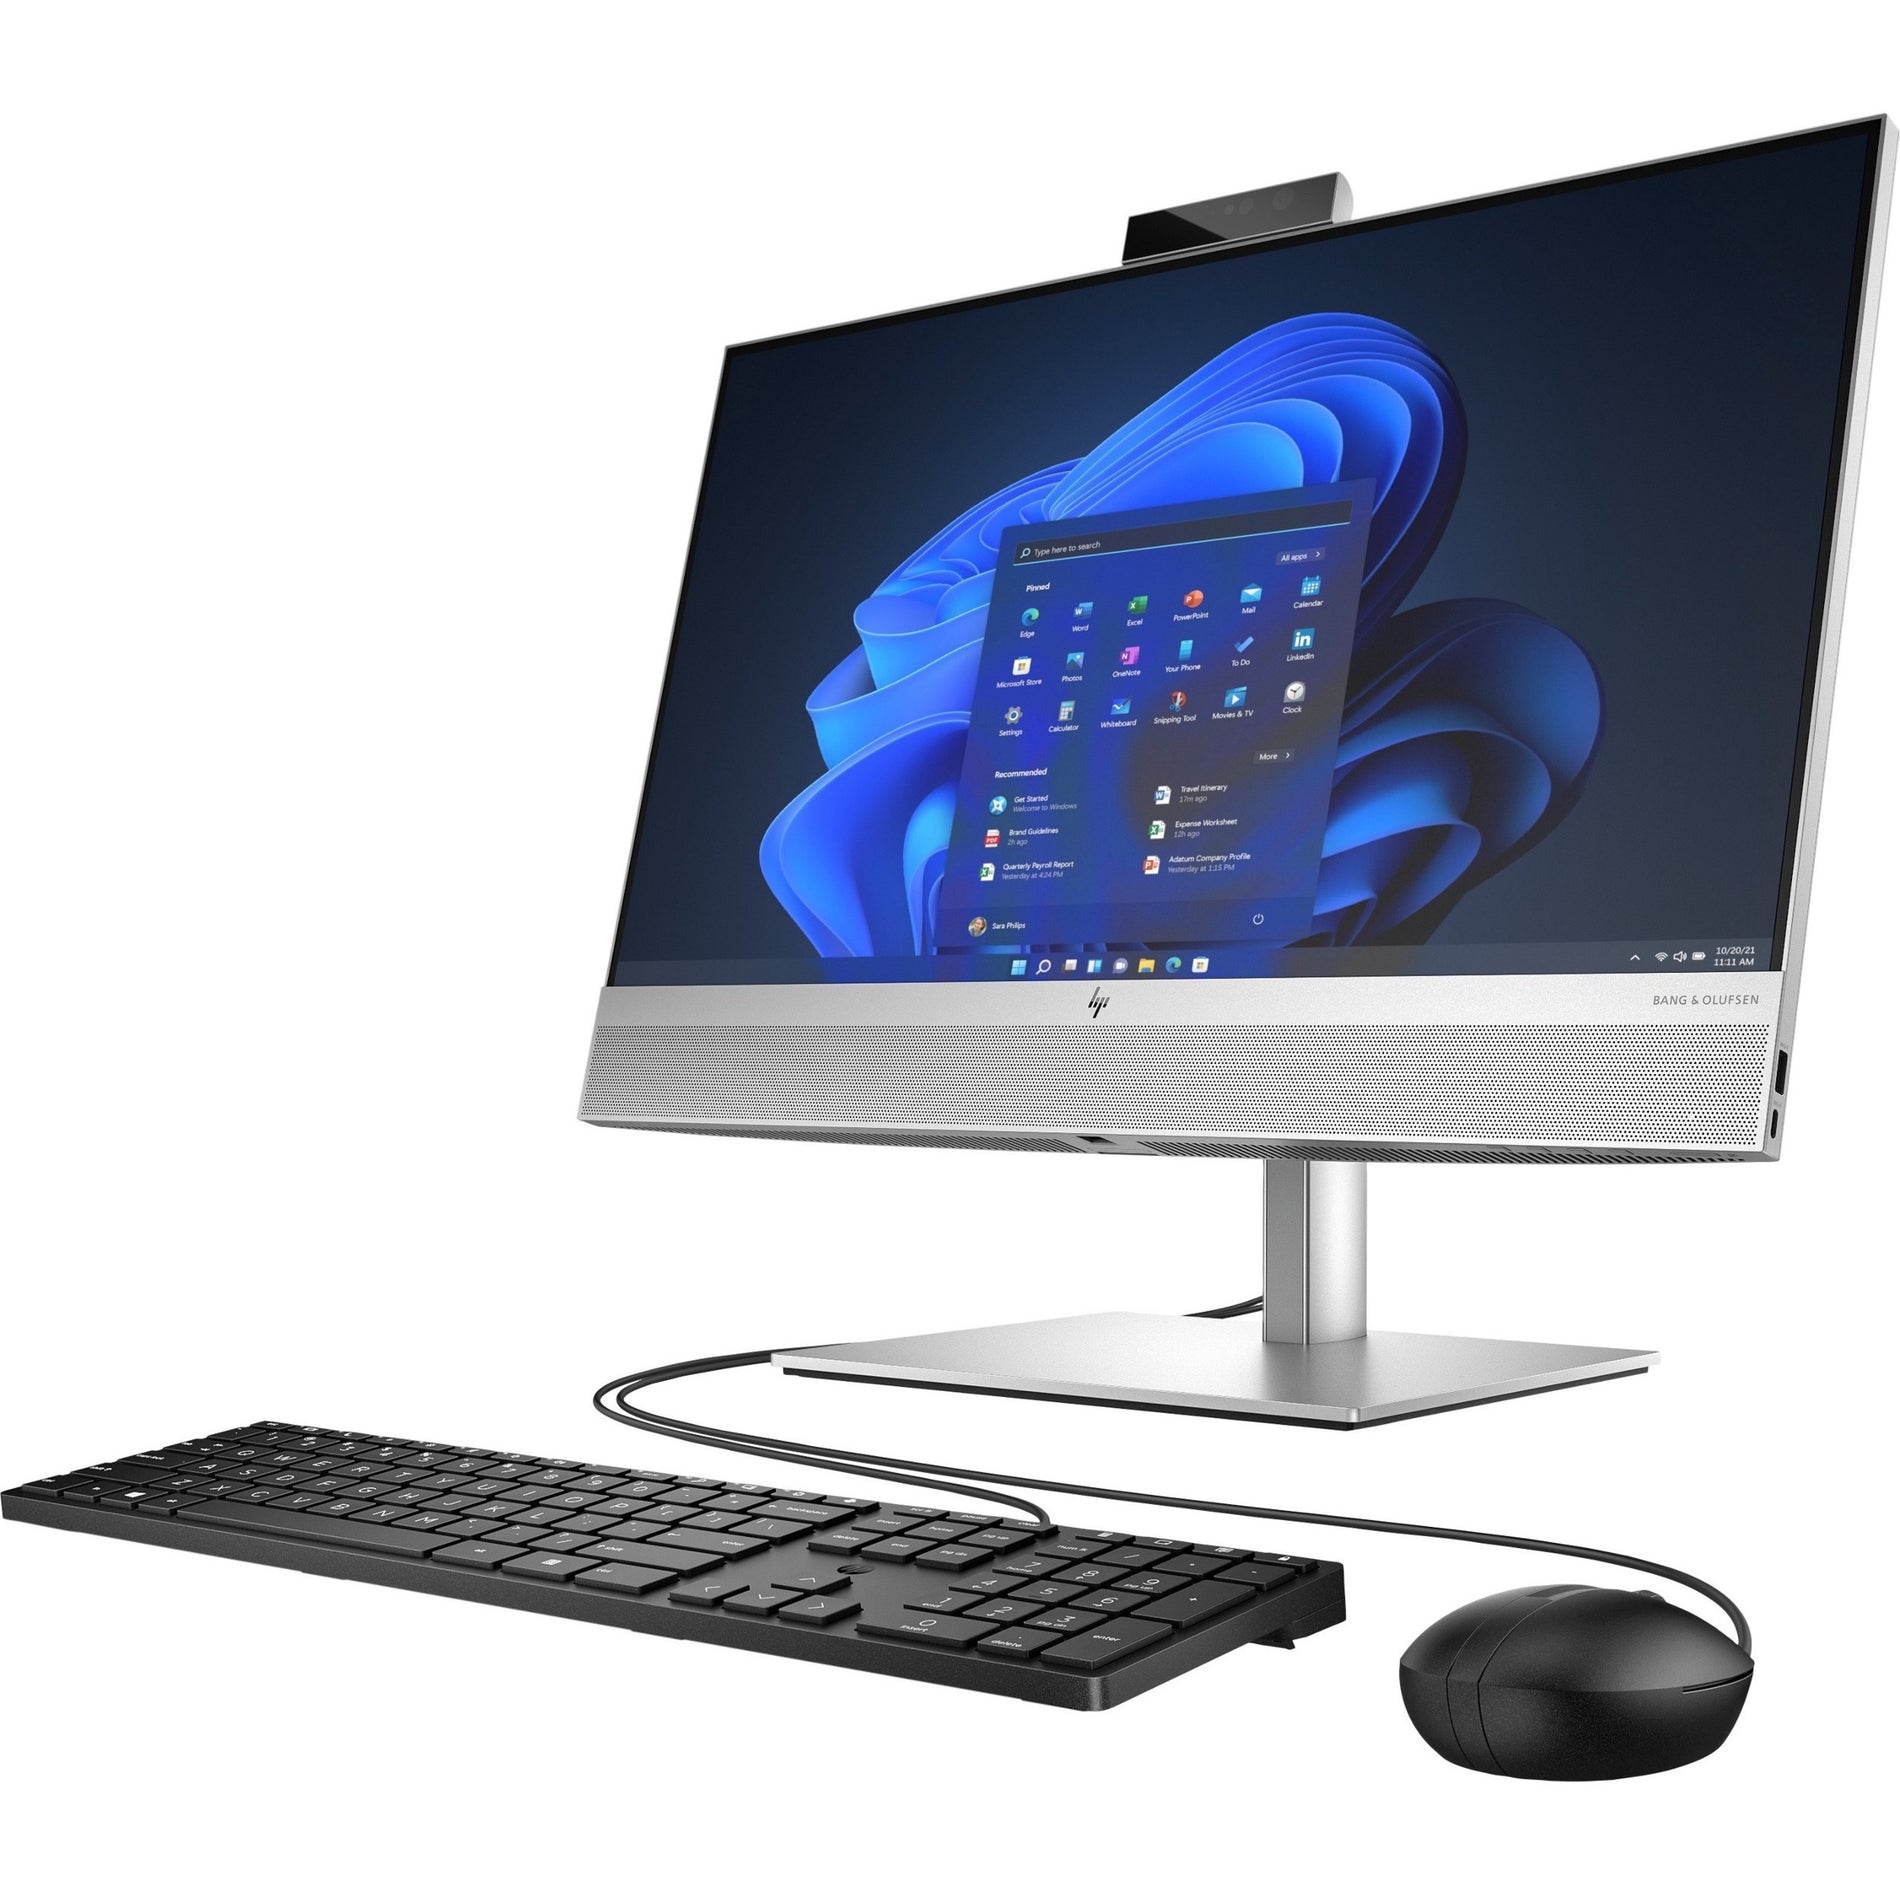 HP EliteOne 840 G9 All-in-One Computer - Intel Core i7 12th Gen - 8GB RAM - 256GB SSD - 23.8" Touchscreen Display [Discontinued]